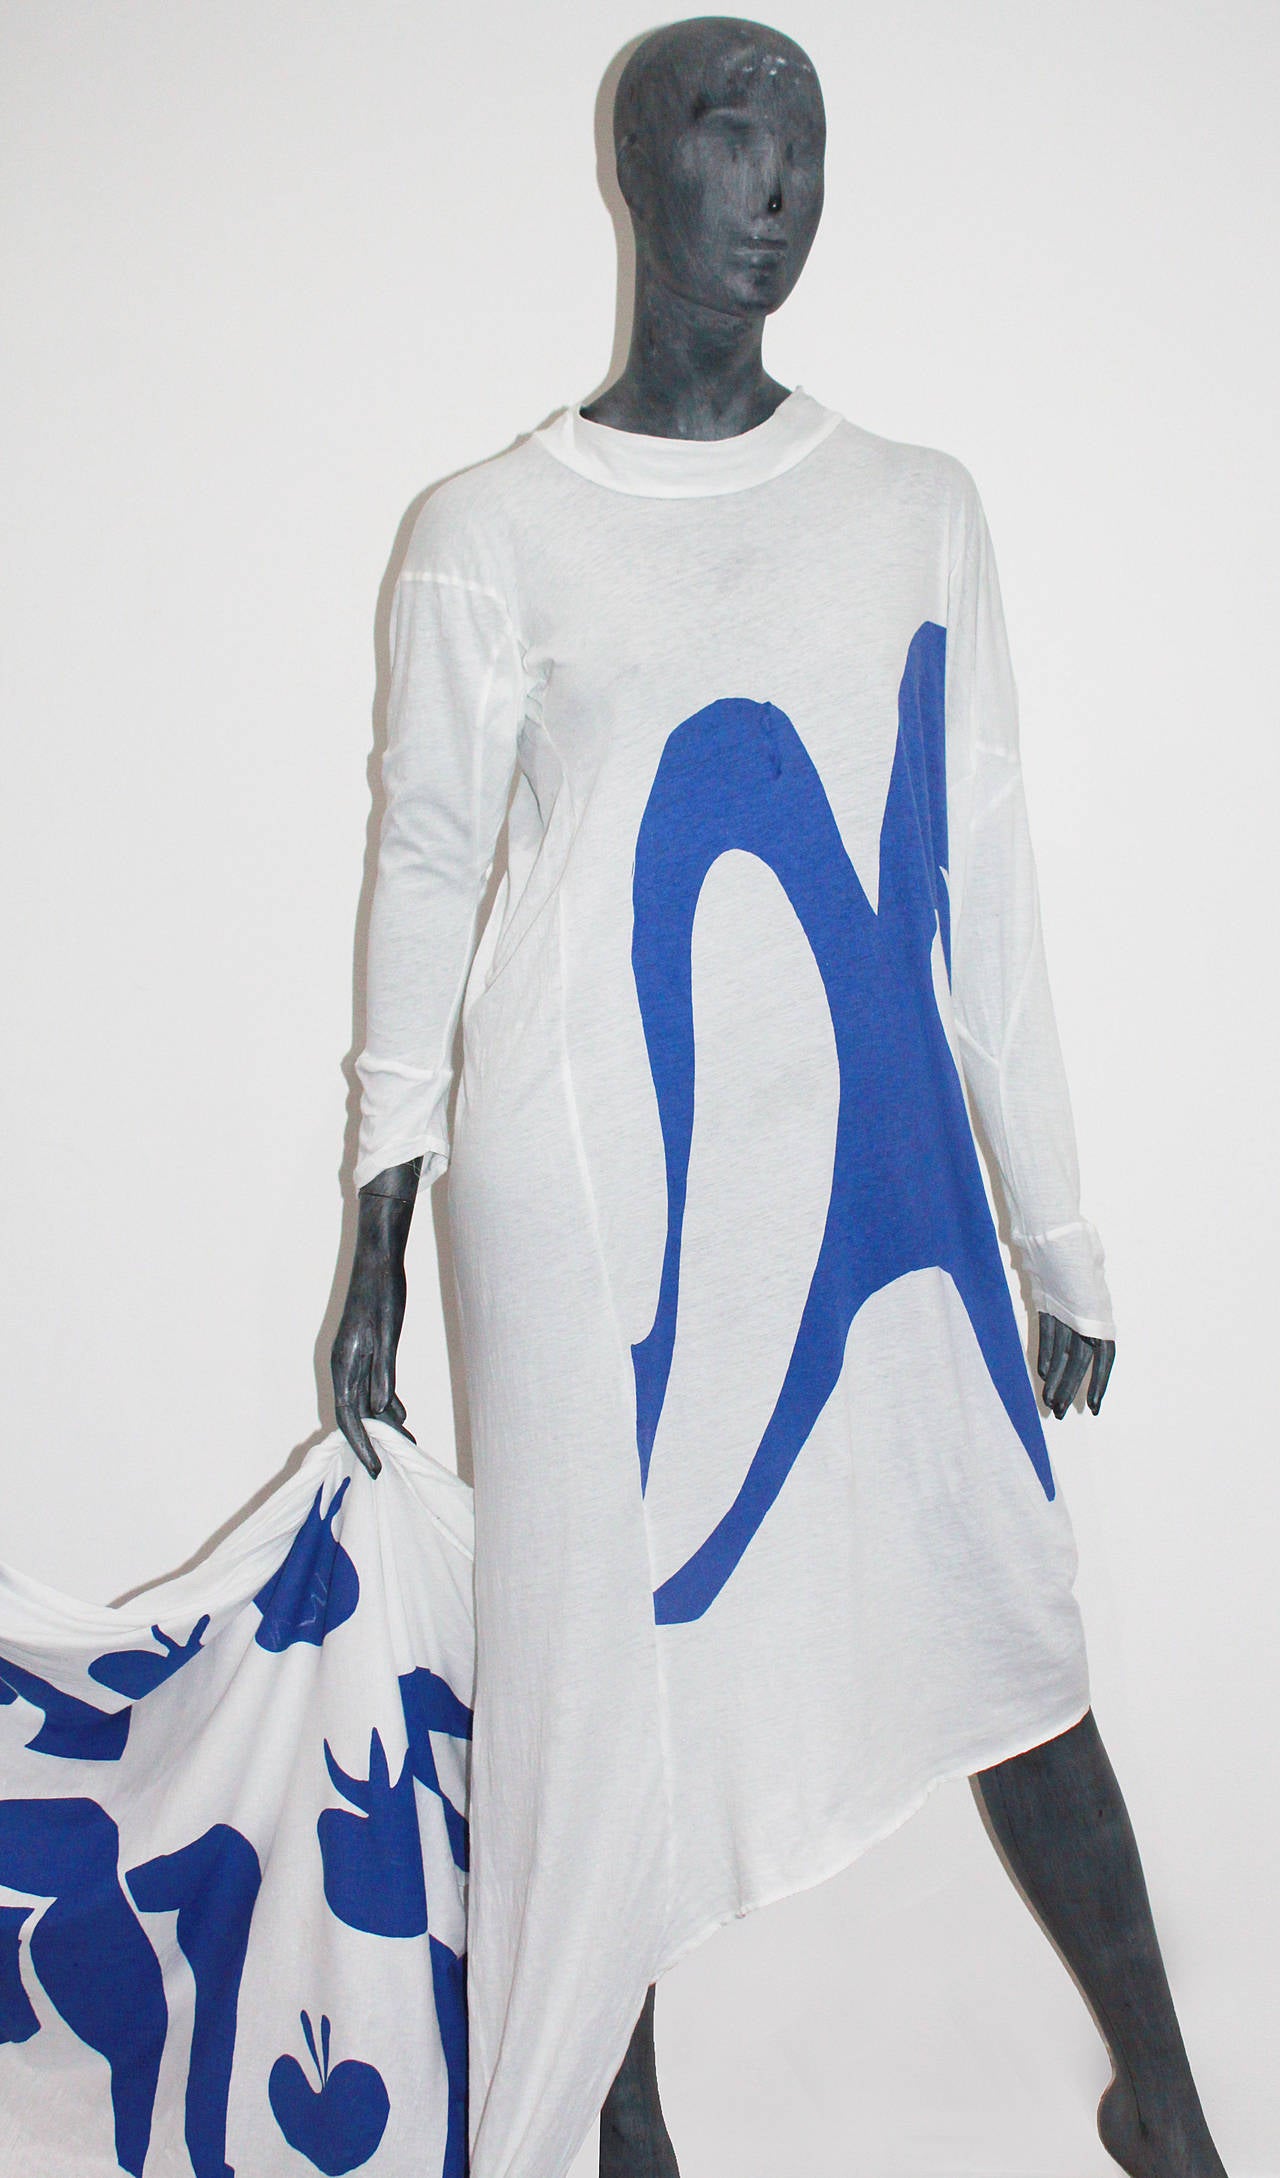 Woman's toga dress printed with Henri Matisse's Femmes et Singes - Designed by Vivienne Westwood and Malcolm McLaren. This simple T-Shapes dress is from Westwood's iconic collection Nostalgia of Mud (1982-1983).